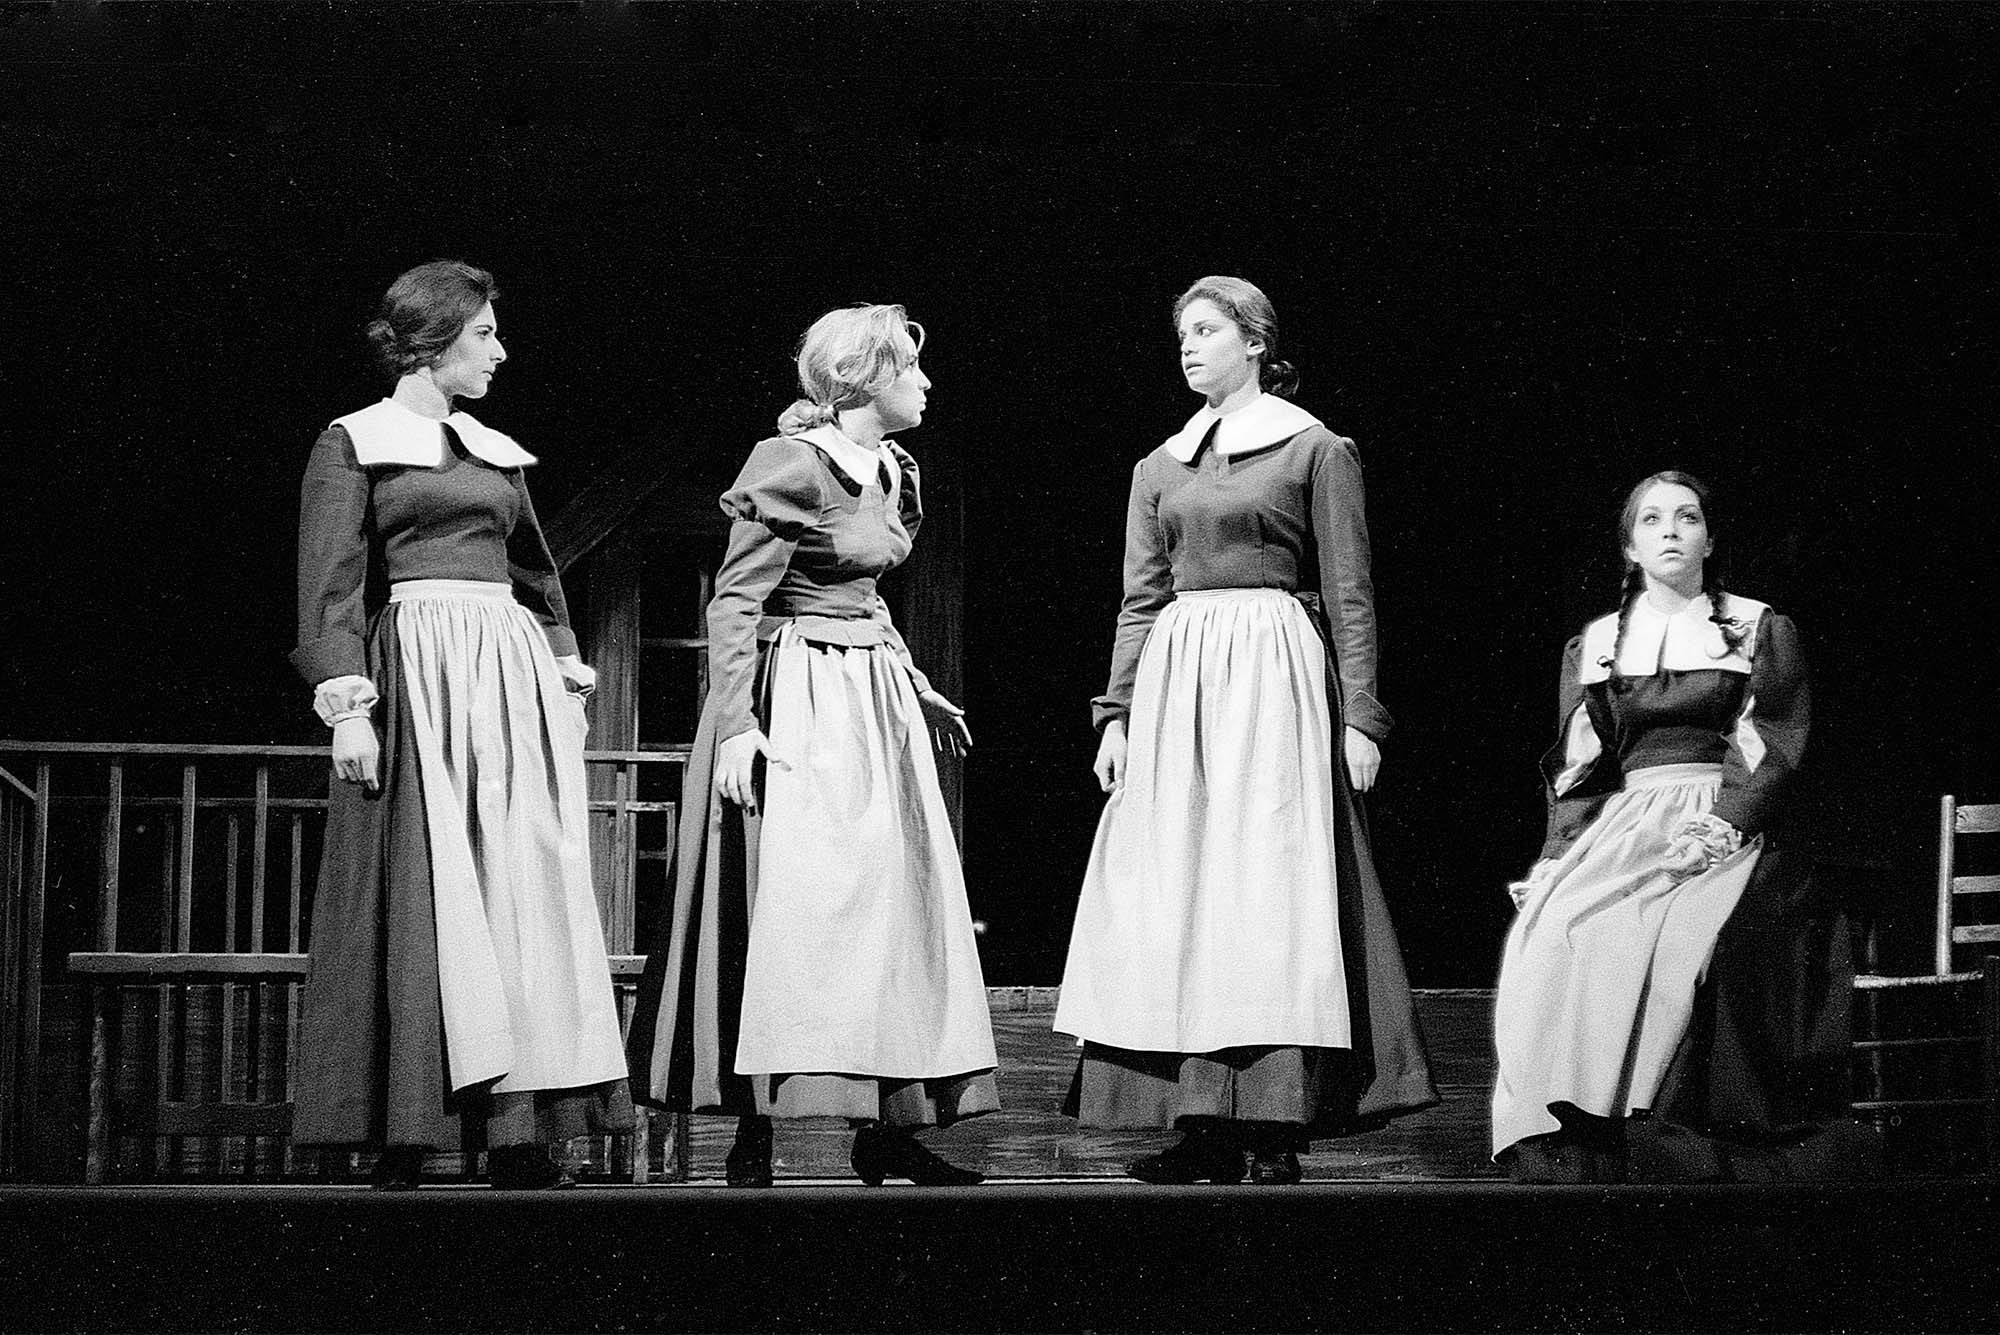 Photo: An old black and white photo of 4 college students at Boston University in a production of The Crucible in 1961